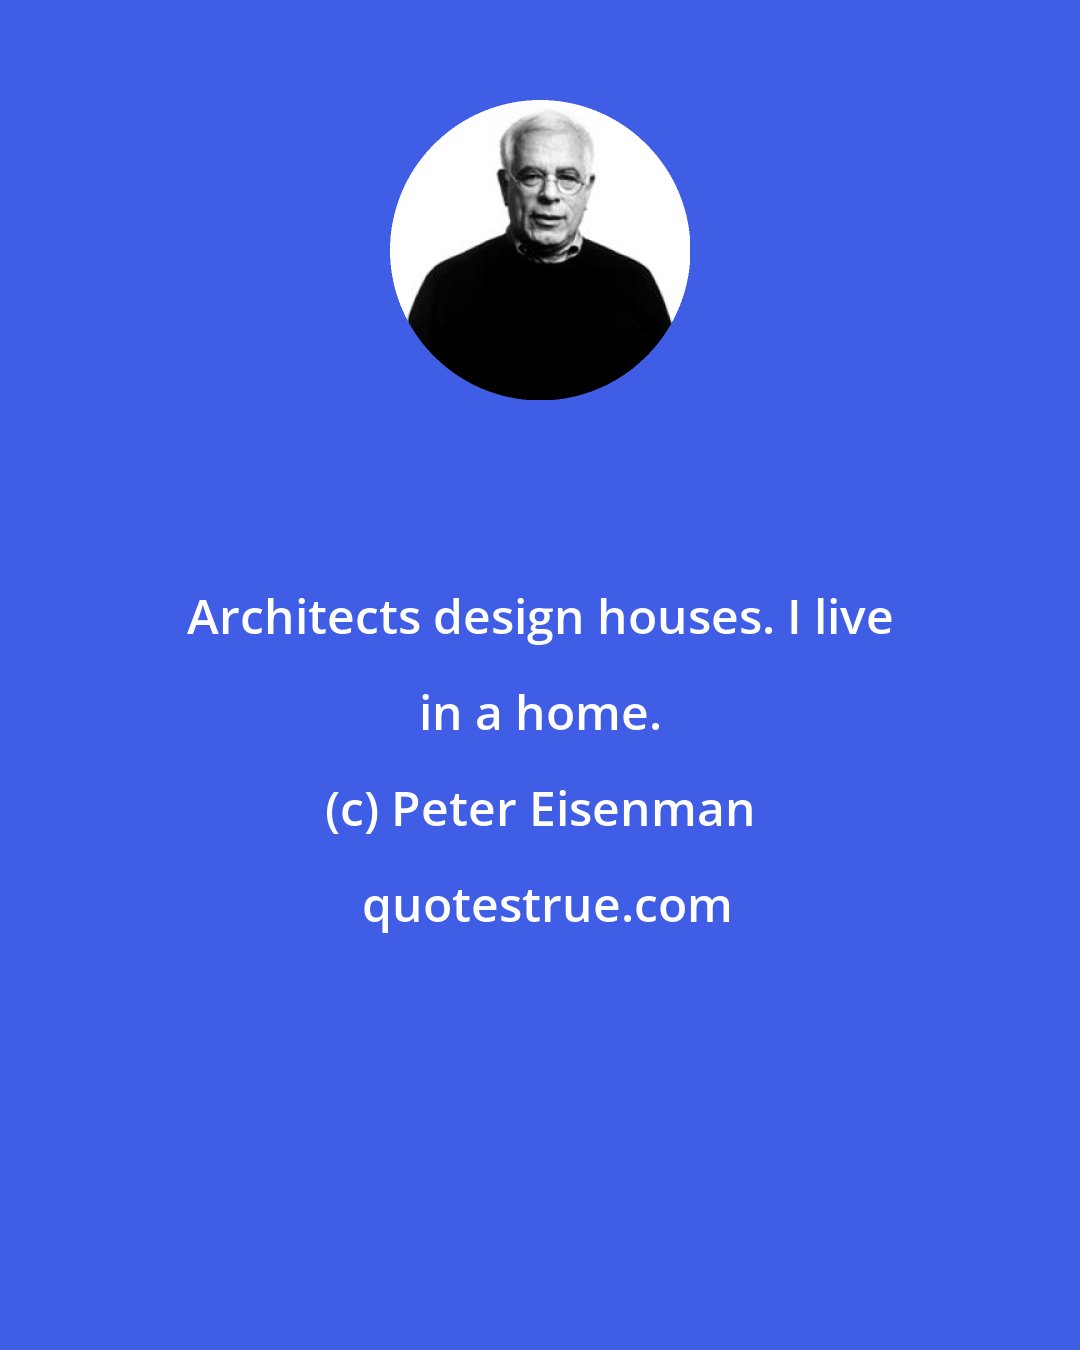 Peter Eisenman: Architects design houses. I live in a home.